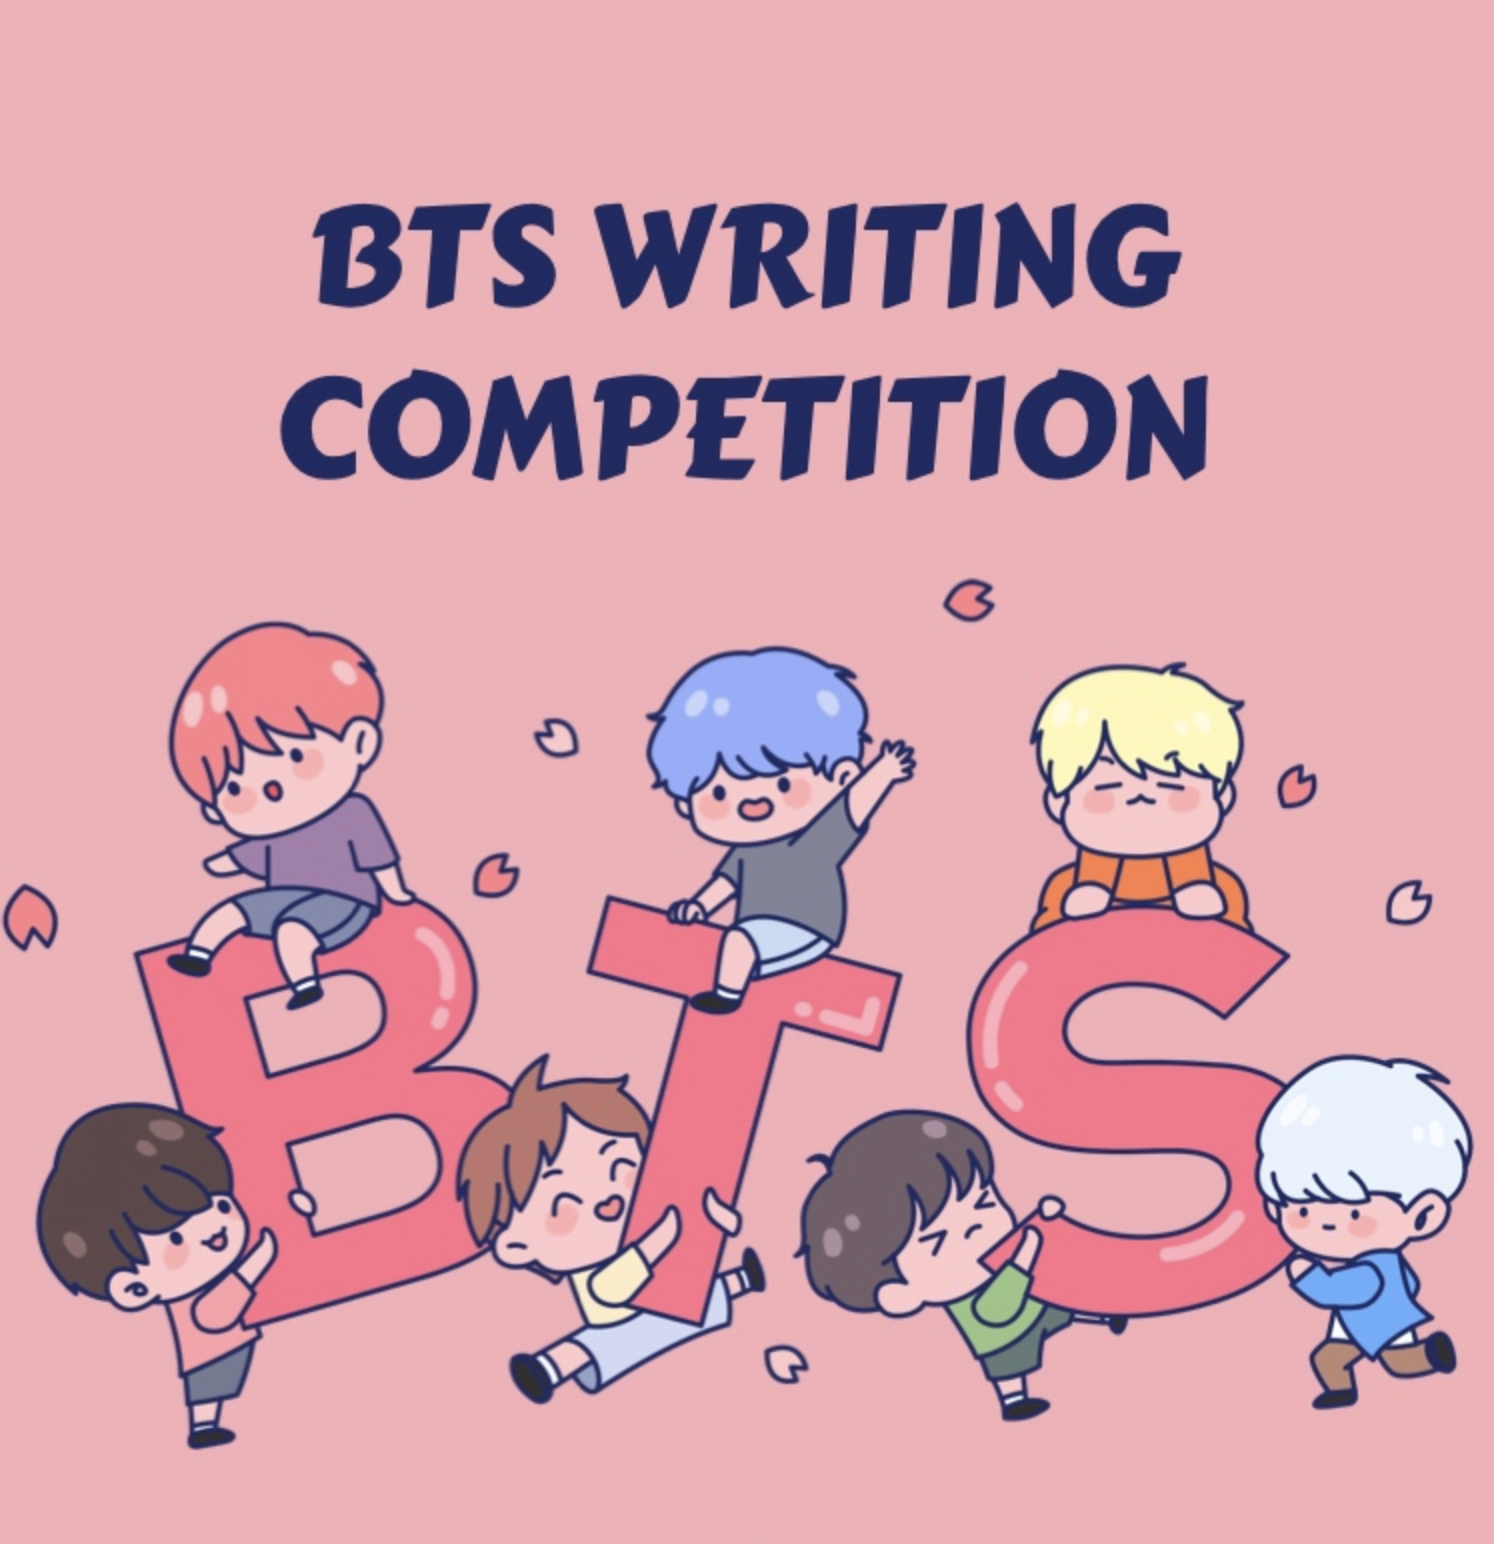 Competition rules. Write BTS. BTS writing. Проект про БТС.